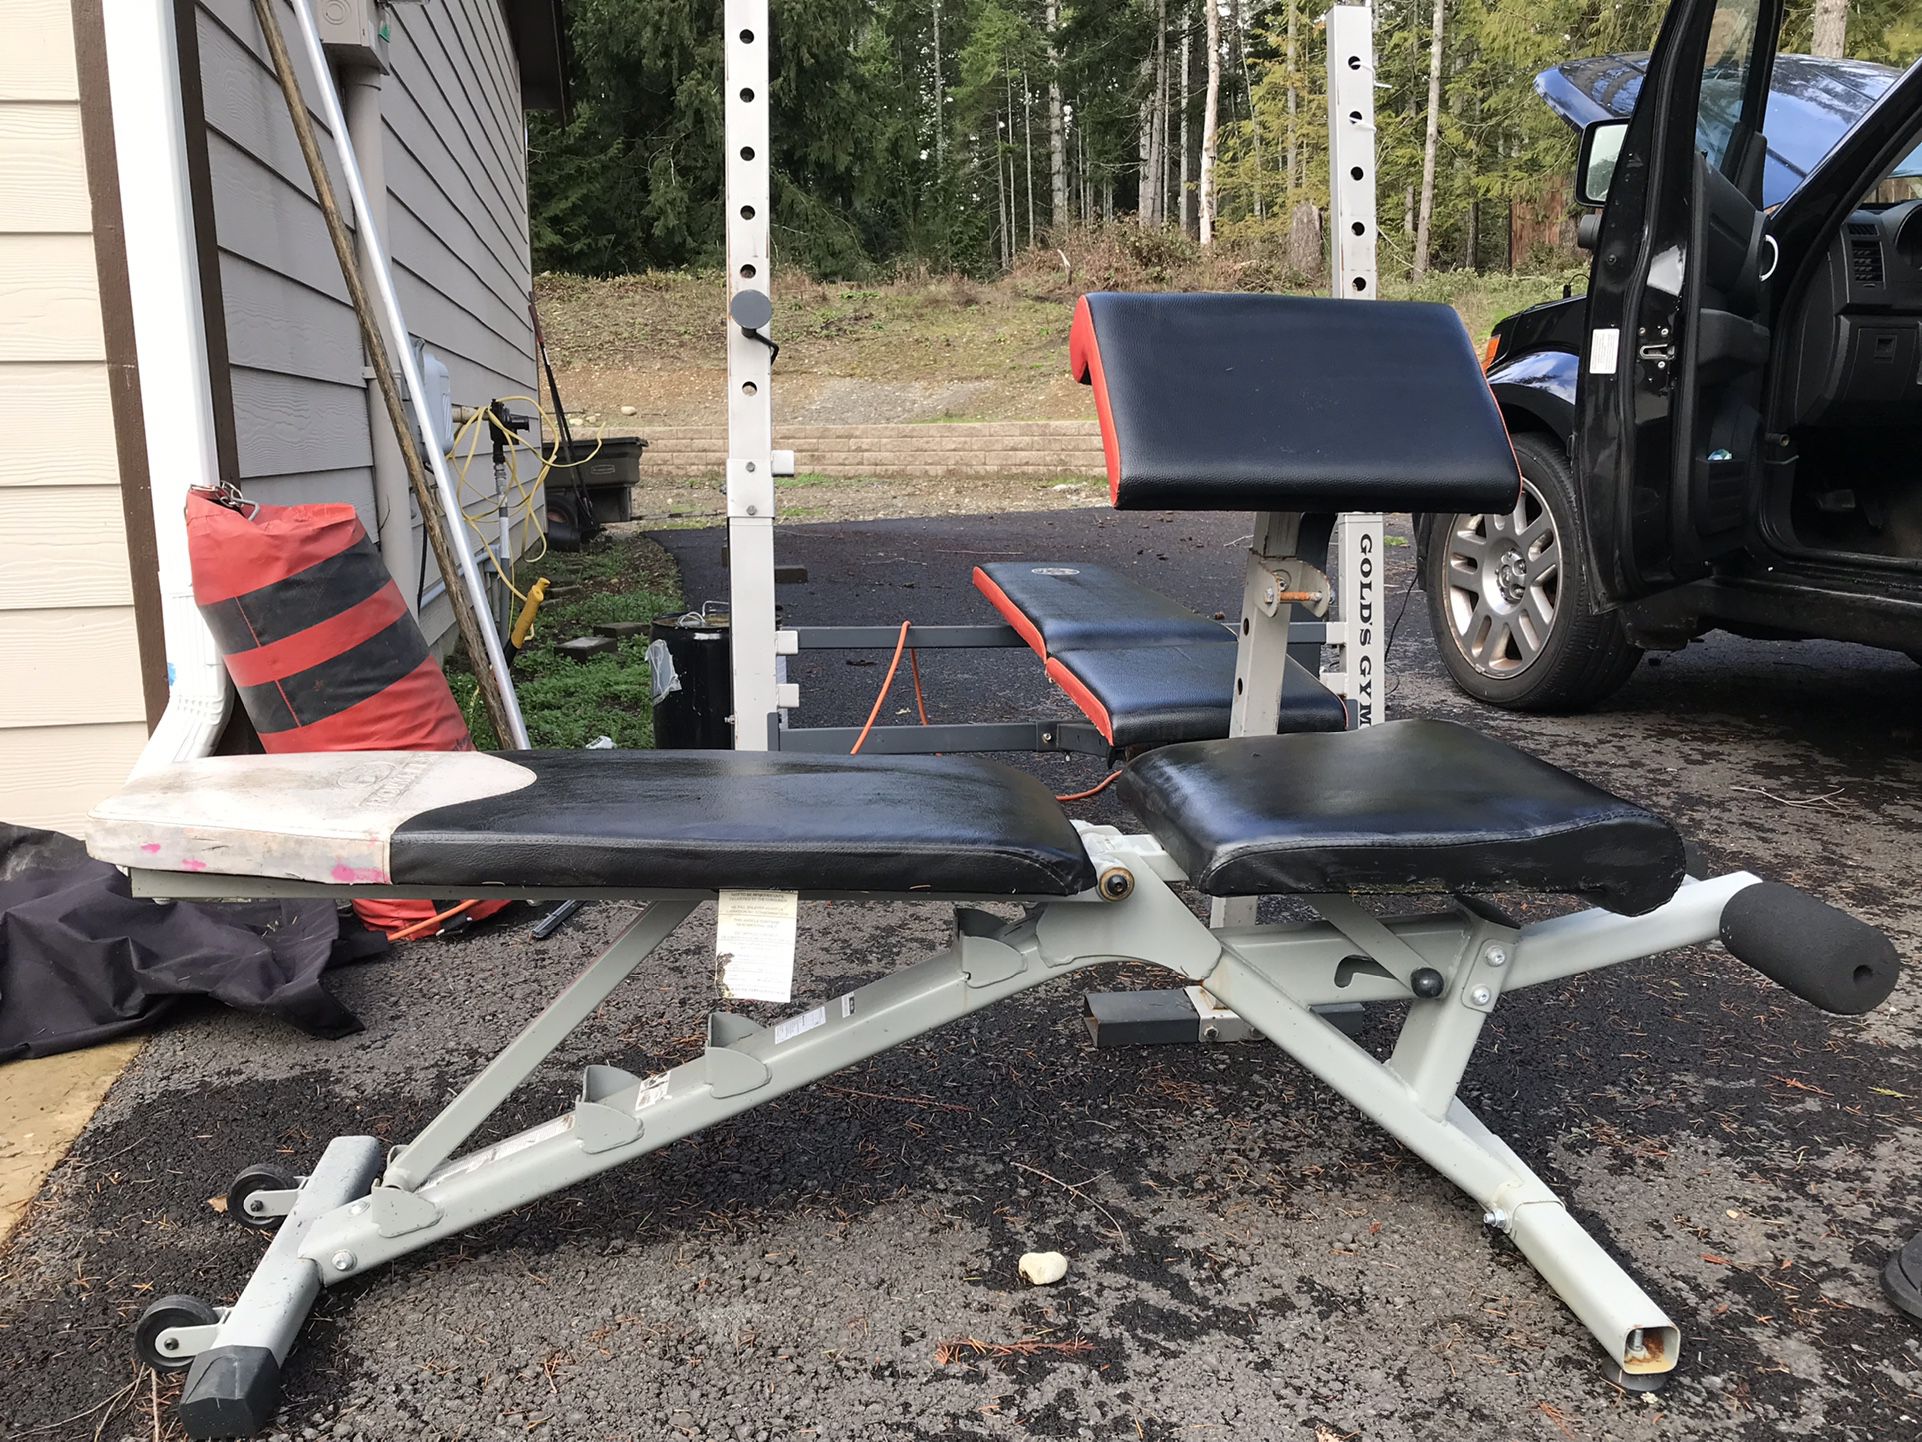 Boflex Bench, And Adjustable Weight Bench Both For $100